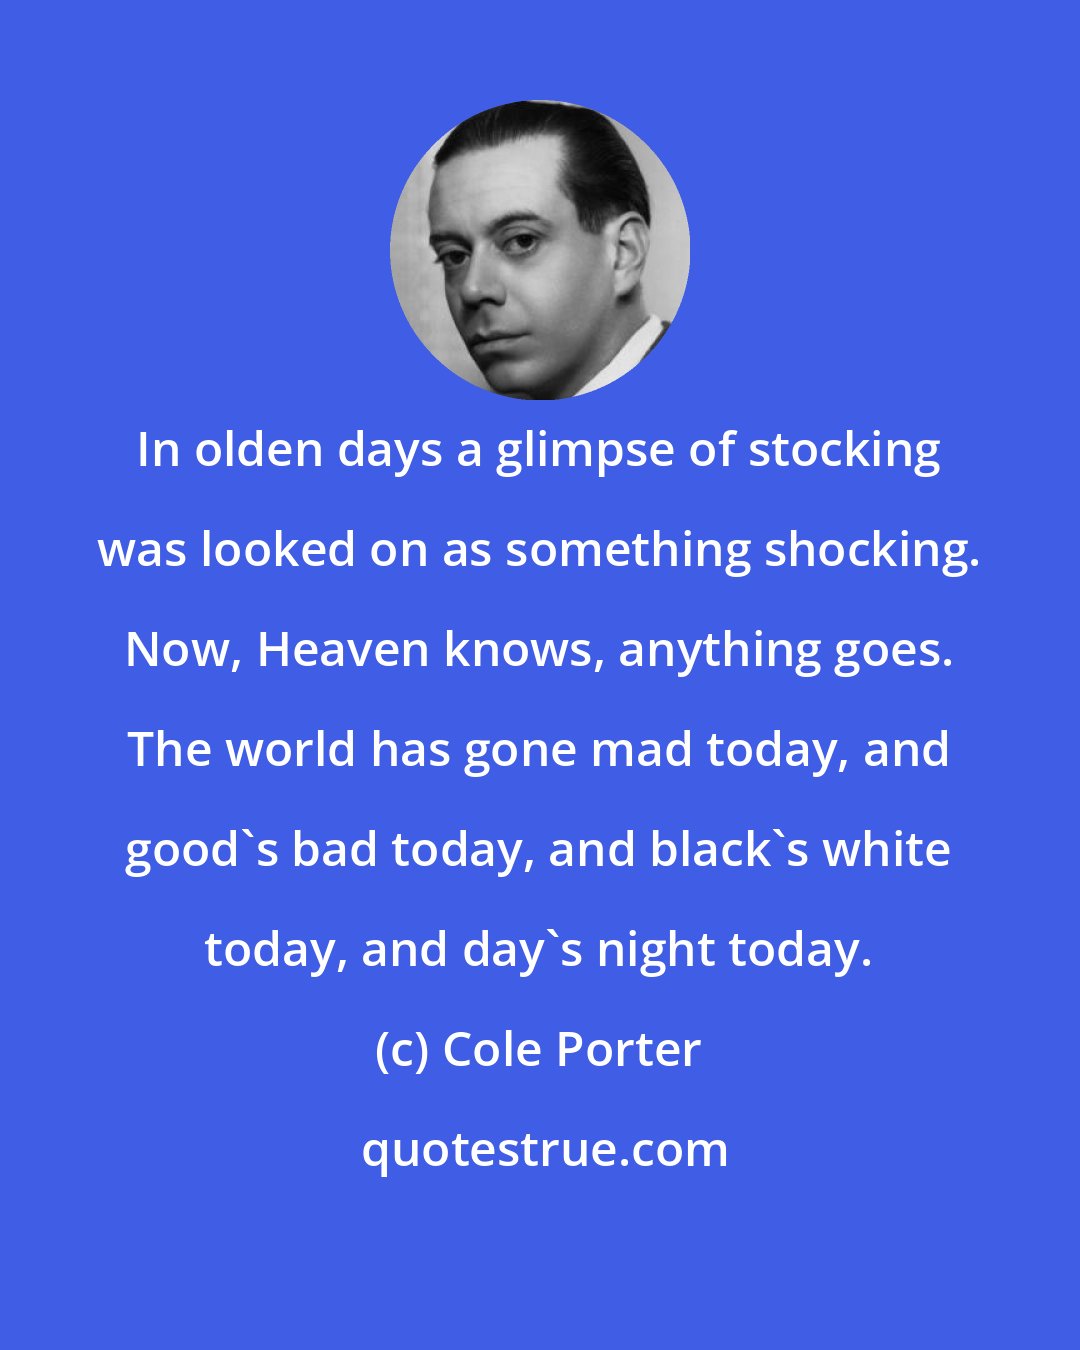 Cole Porter: In olden days a glimpse of stocking was looked on as something shocking. Now, Heaven knows, anything goes. The world has gone mad today, and good's bad today, and black's white today, and day's night today.